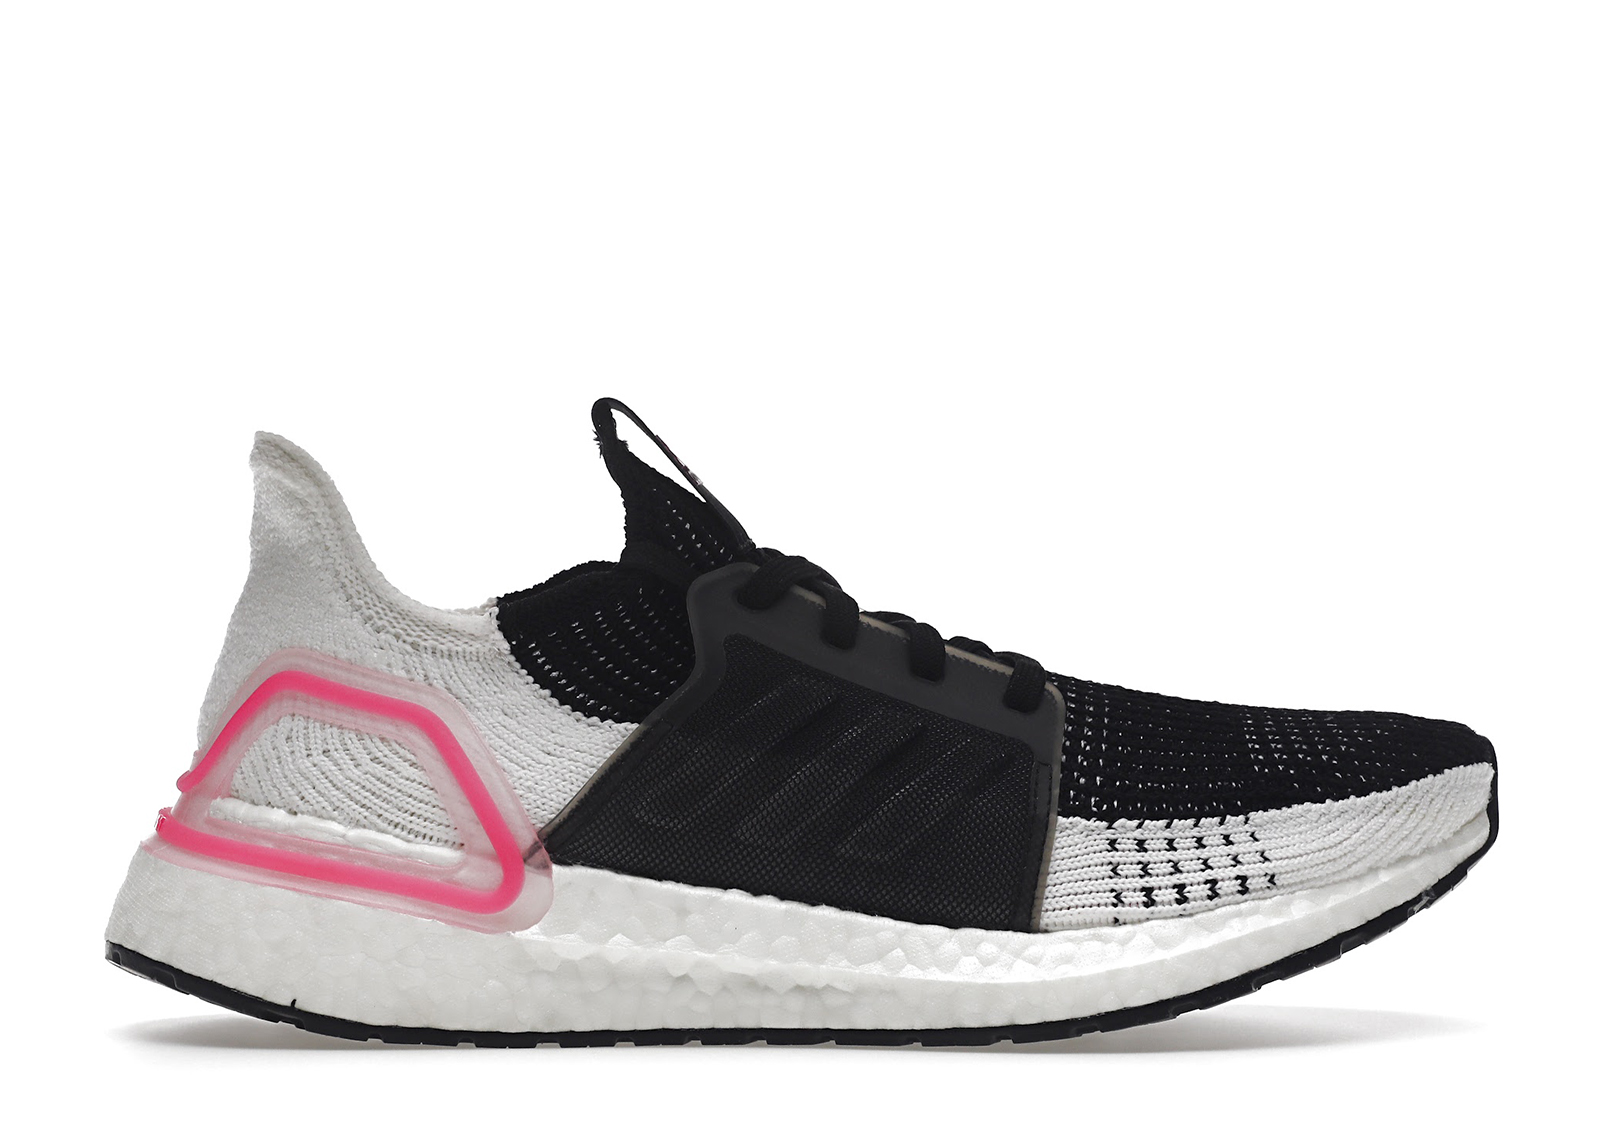 adidas Ultra Boost 19 Soft Vision (Women's) - G27489 - US